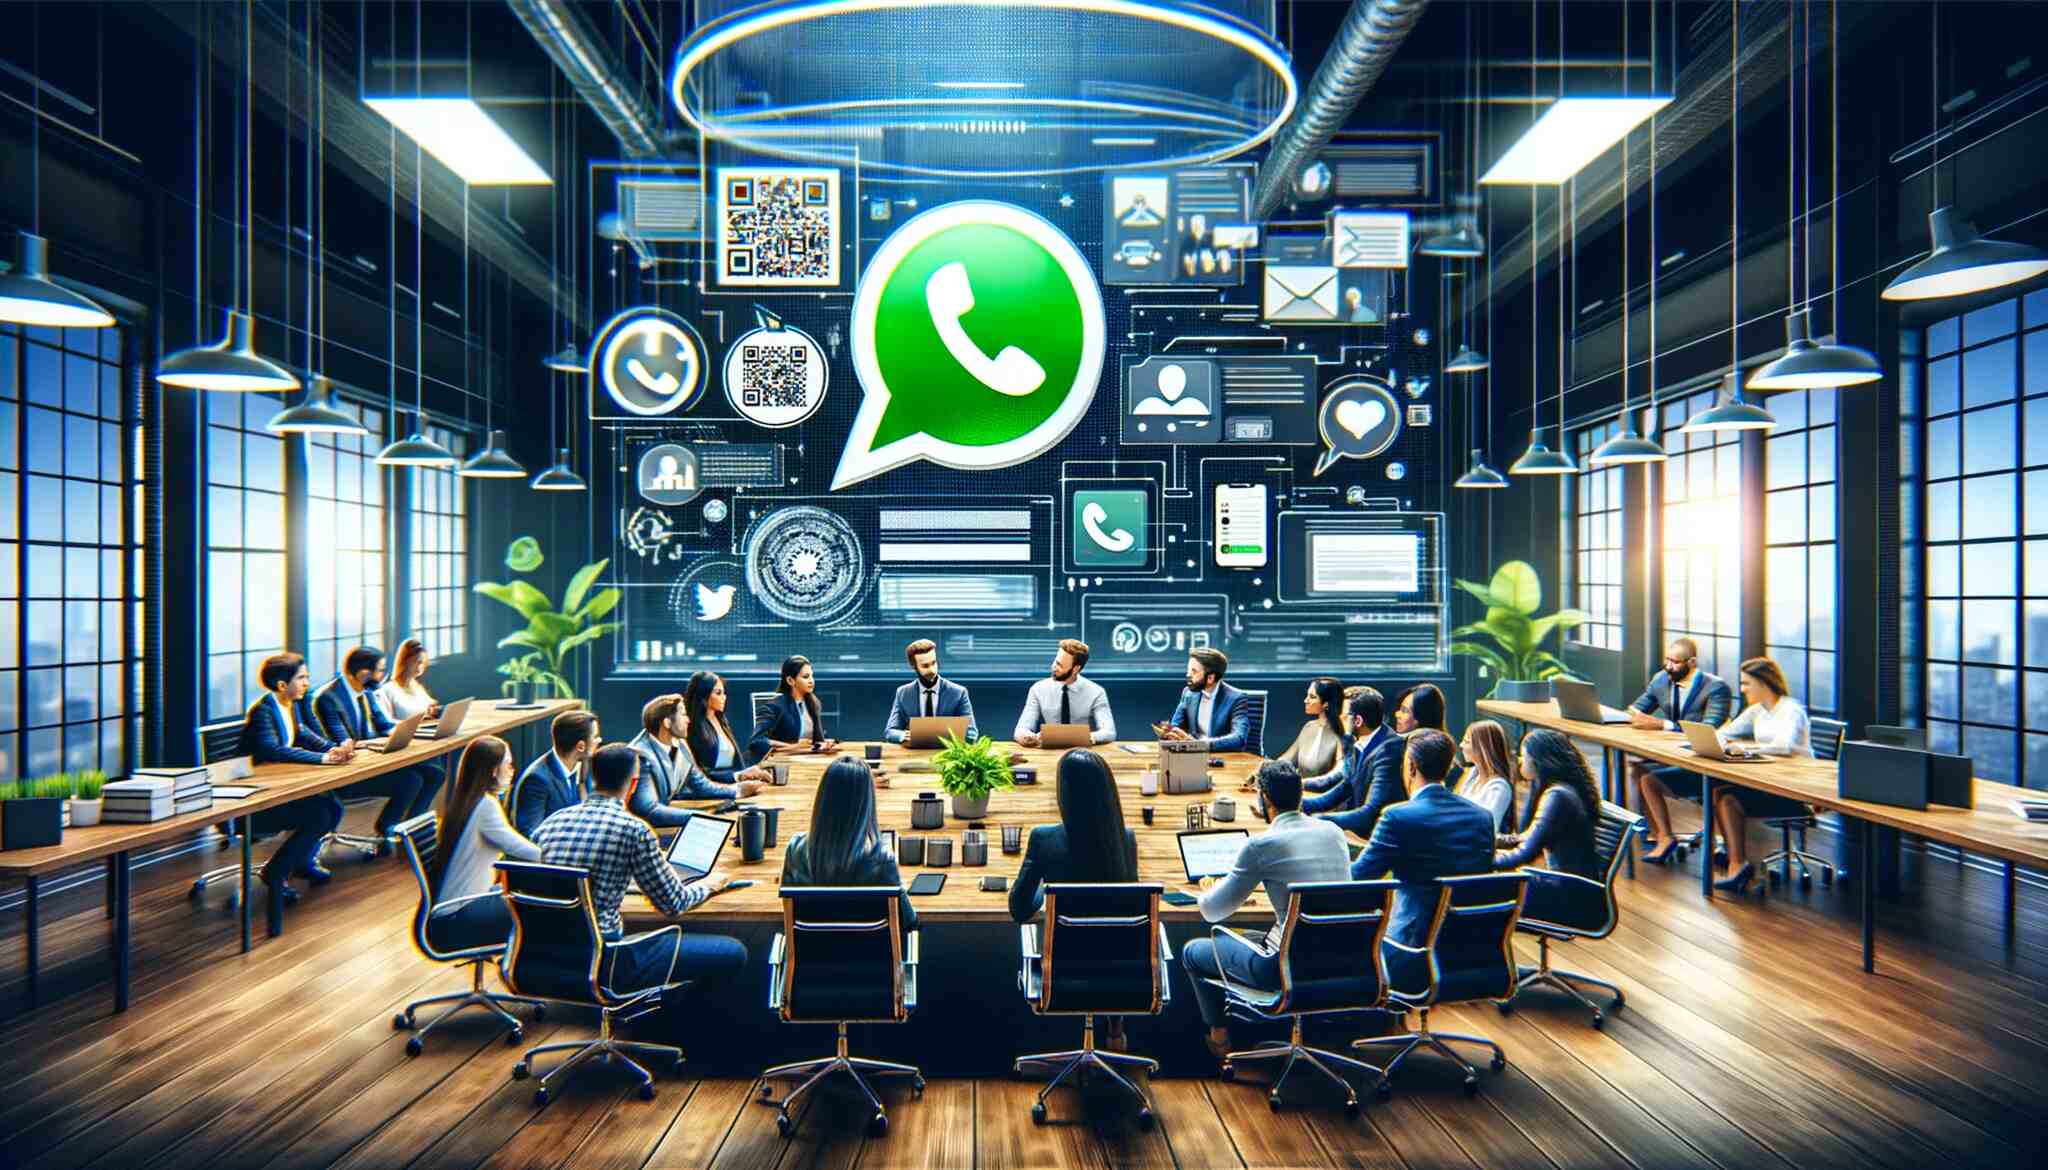 vibrant office scene where people are gathered around a large table and a WhatsApp logo with QR codes